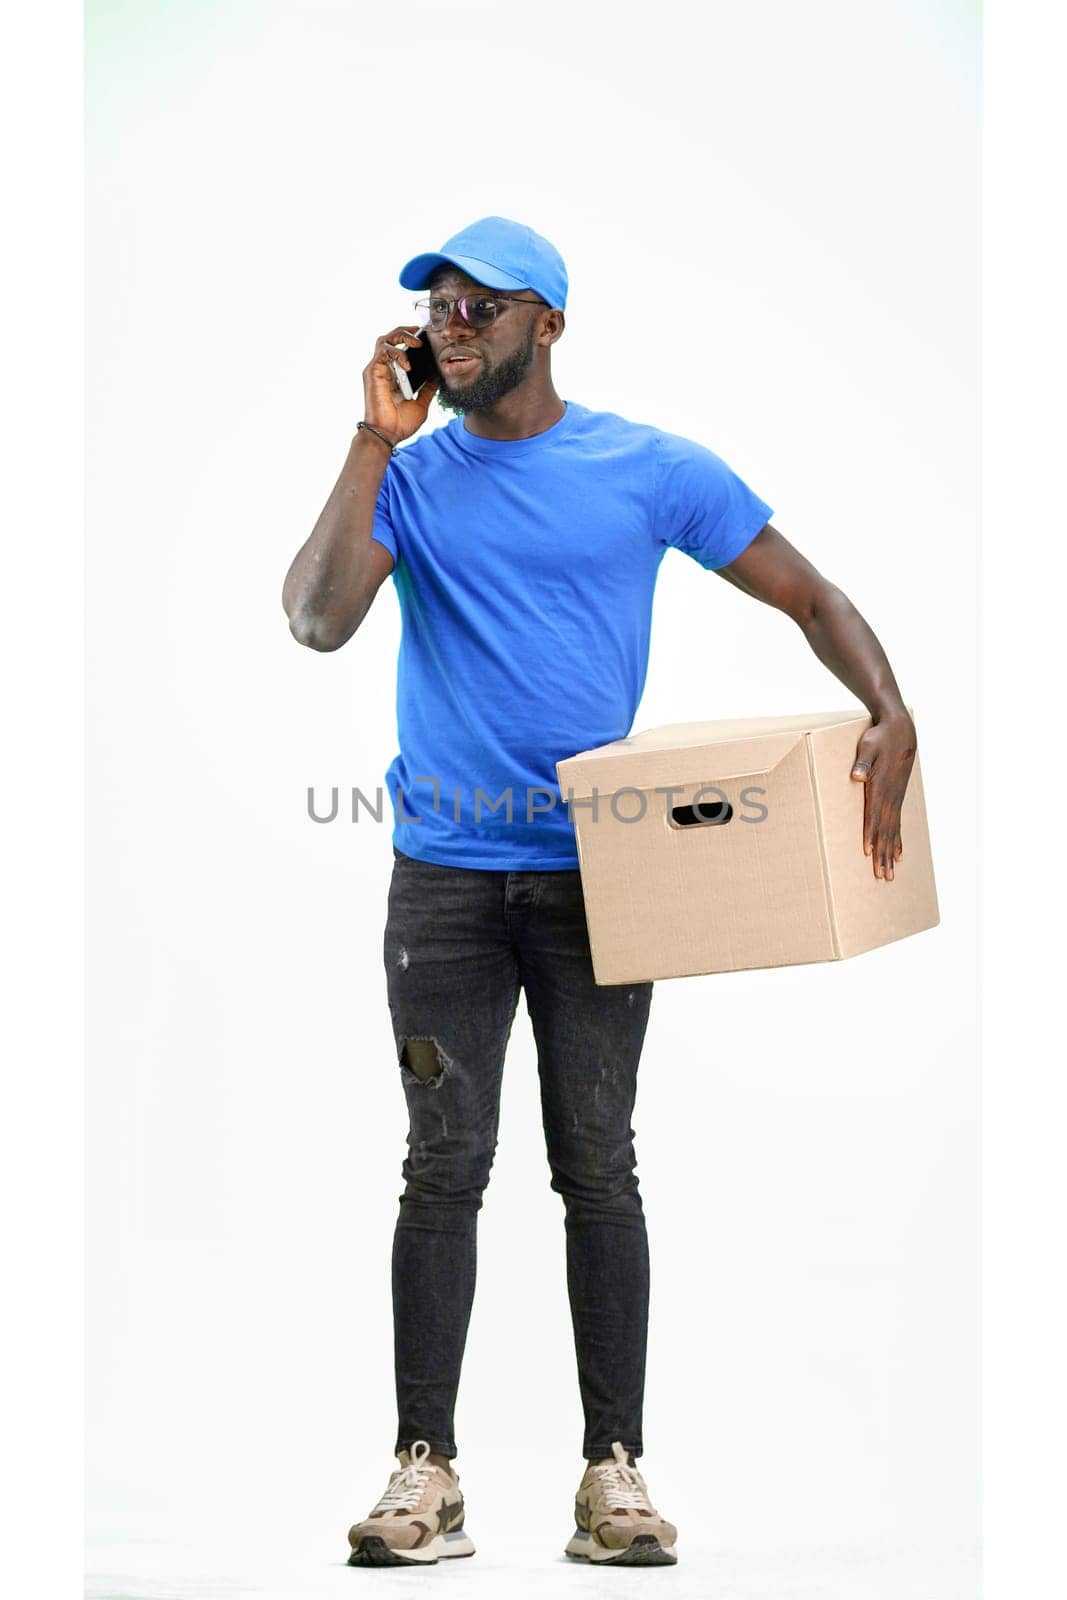 The deliveryman, in full height, on a white background, talking on the phone by Prosto